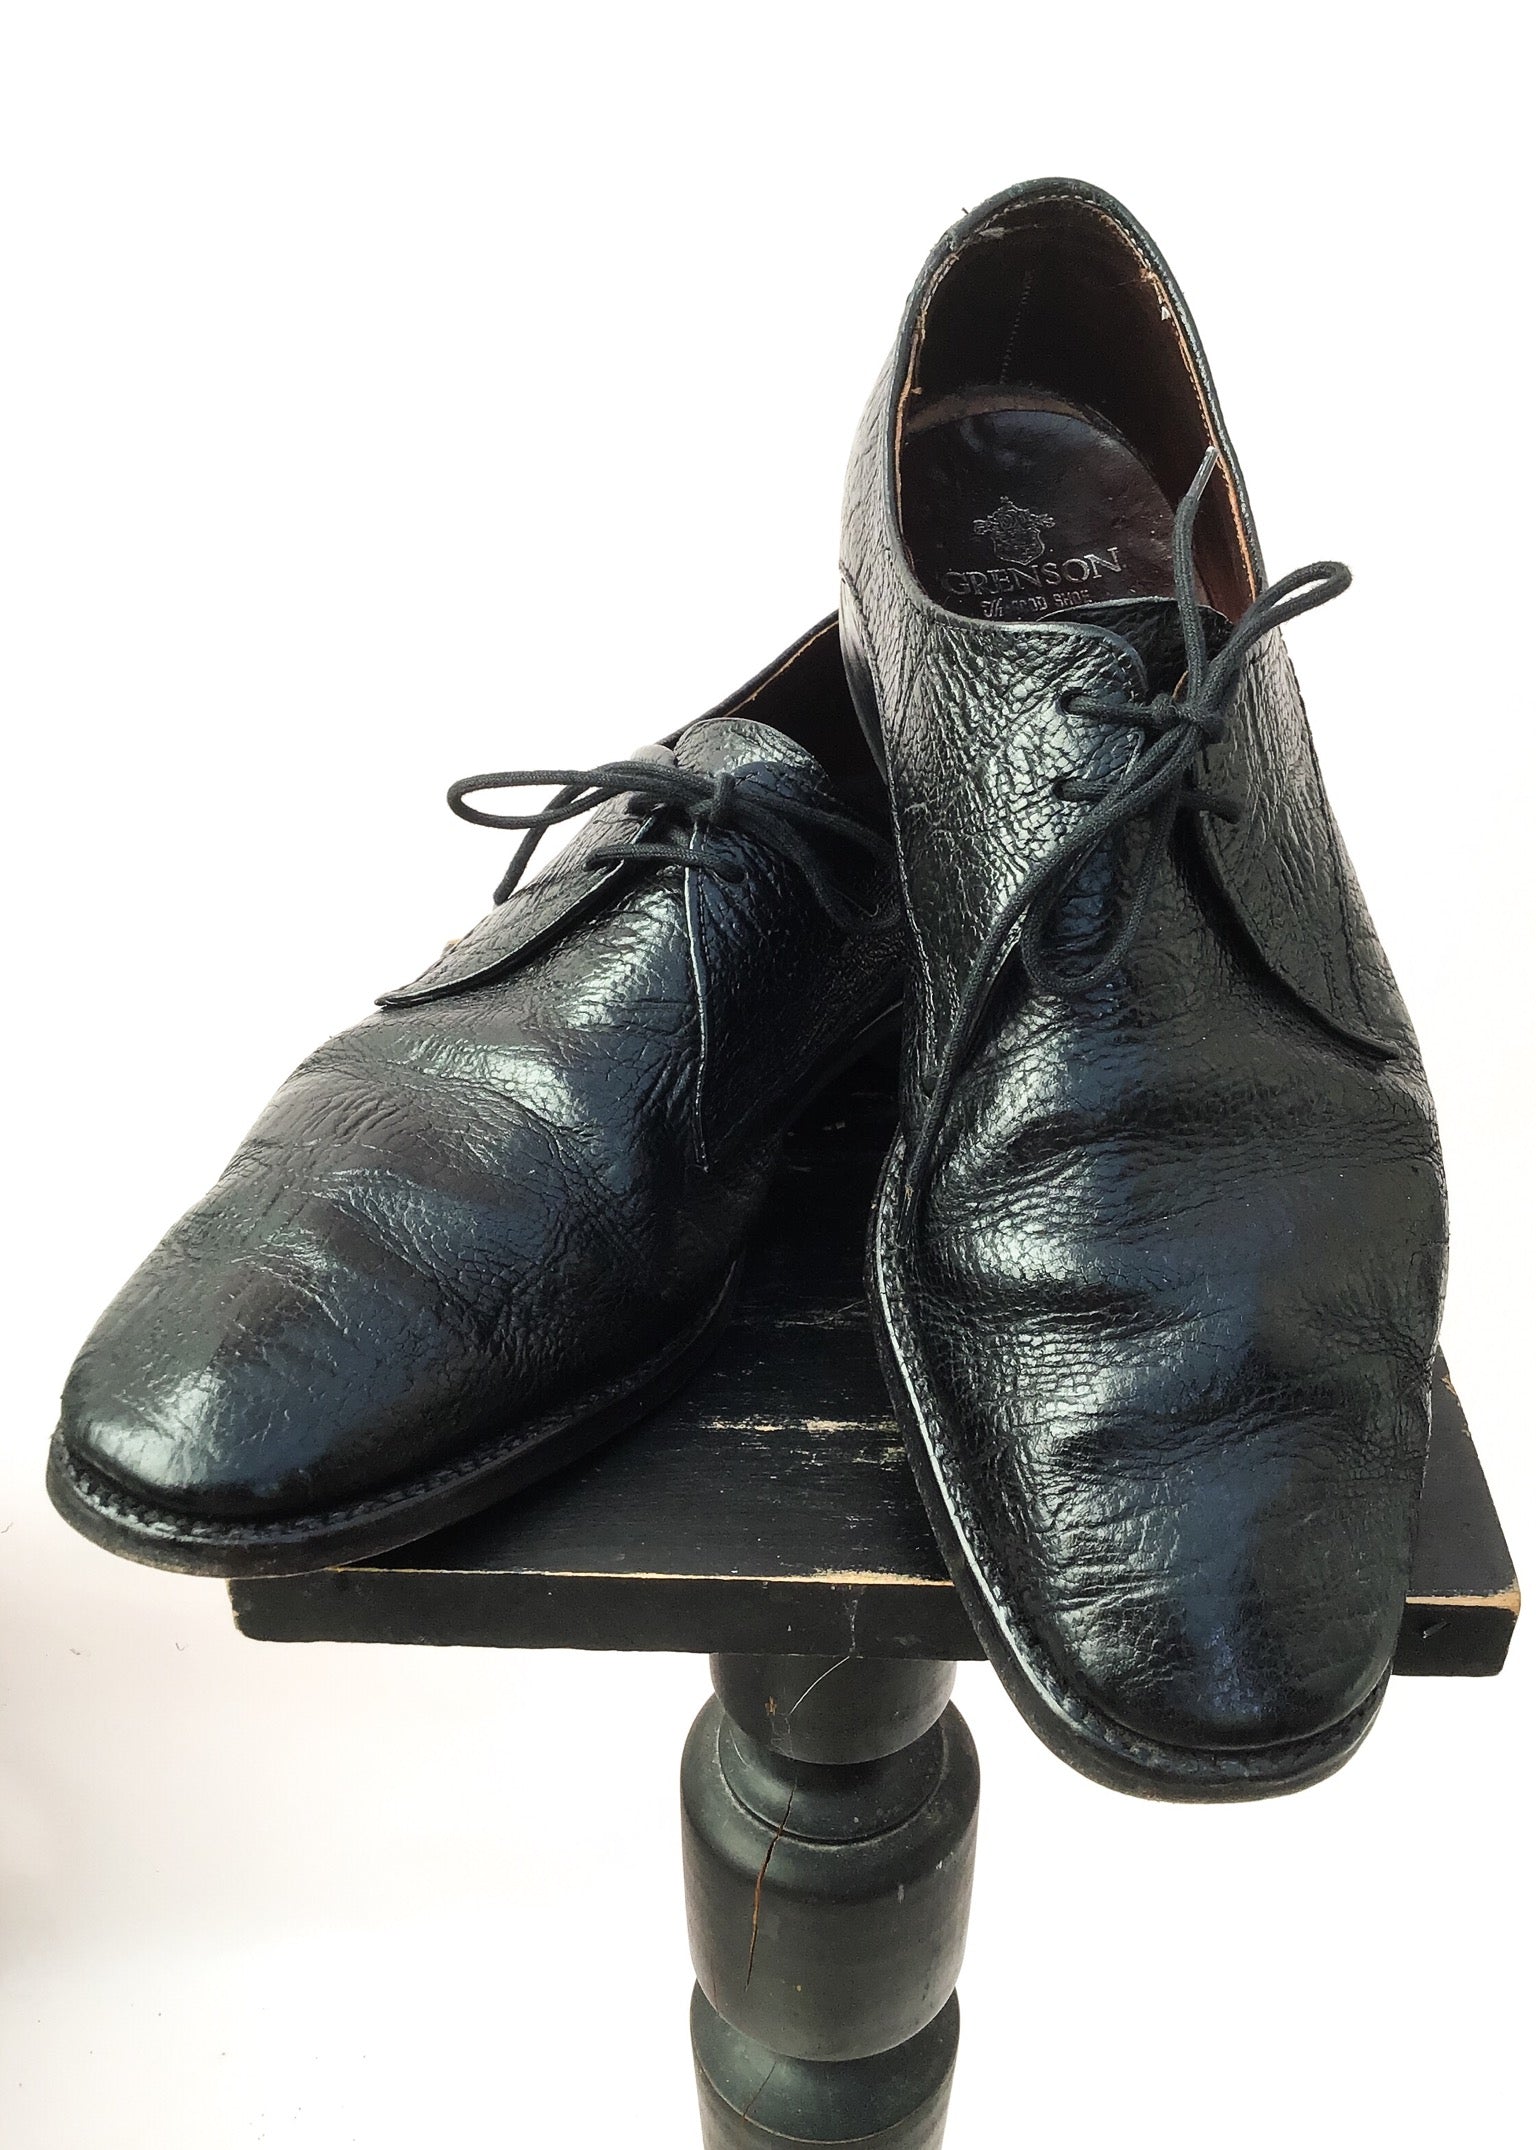 Buy size 8.5 vintage antelope black leather lace up shoes by grenson.